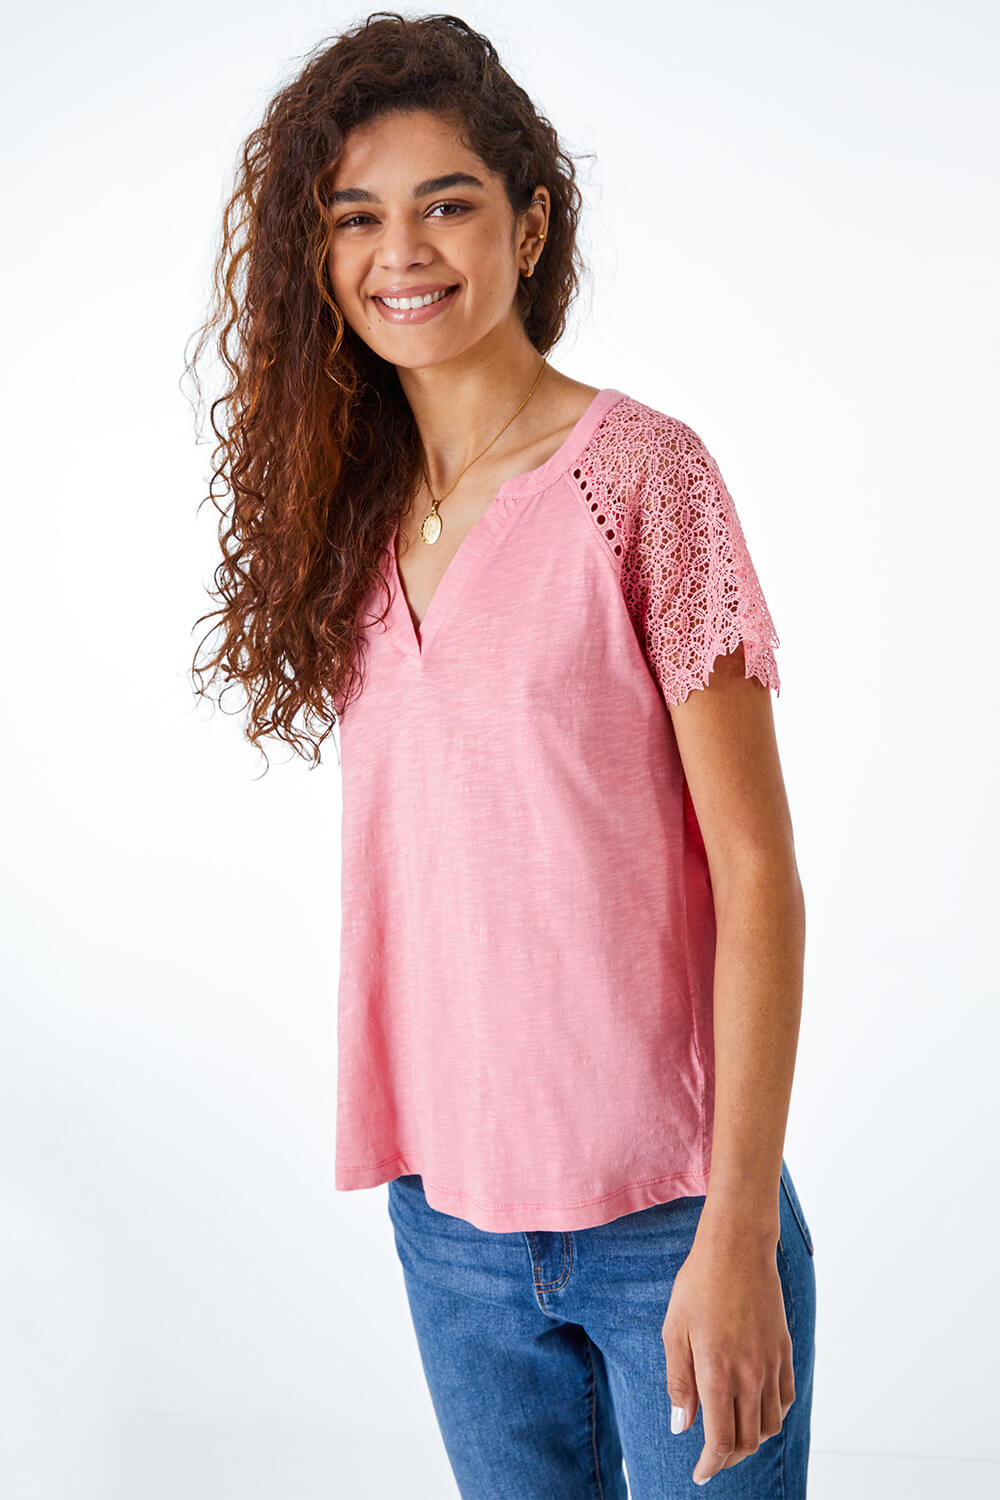 PINK Embroidered Sleeve Jersey T-Shirt, Image 4 of 5